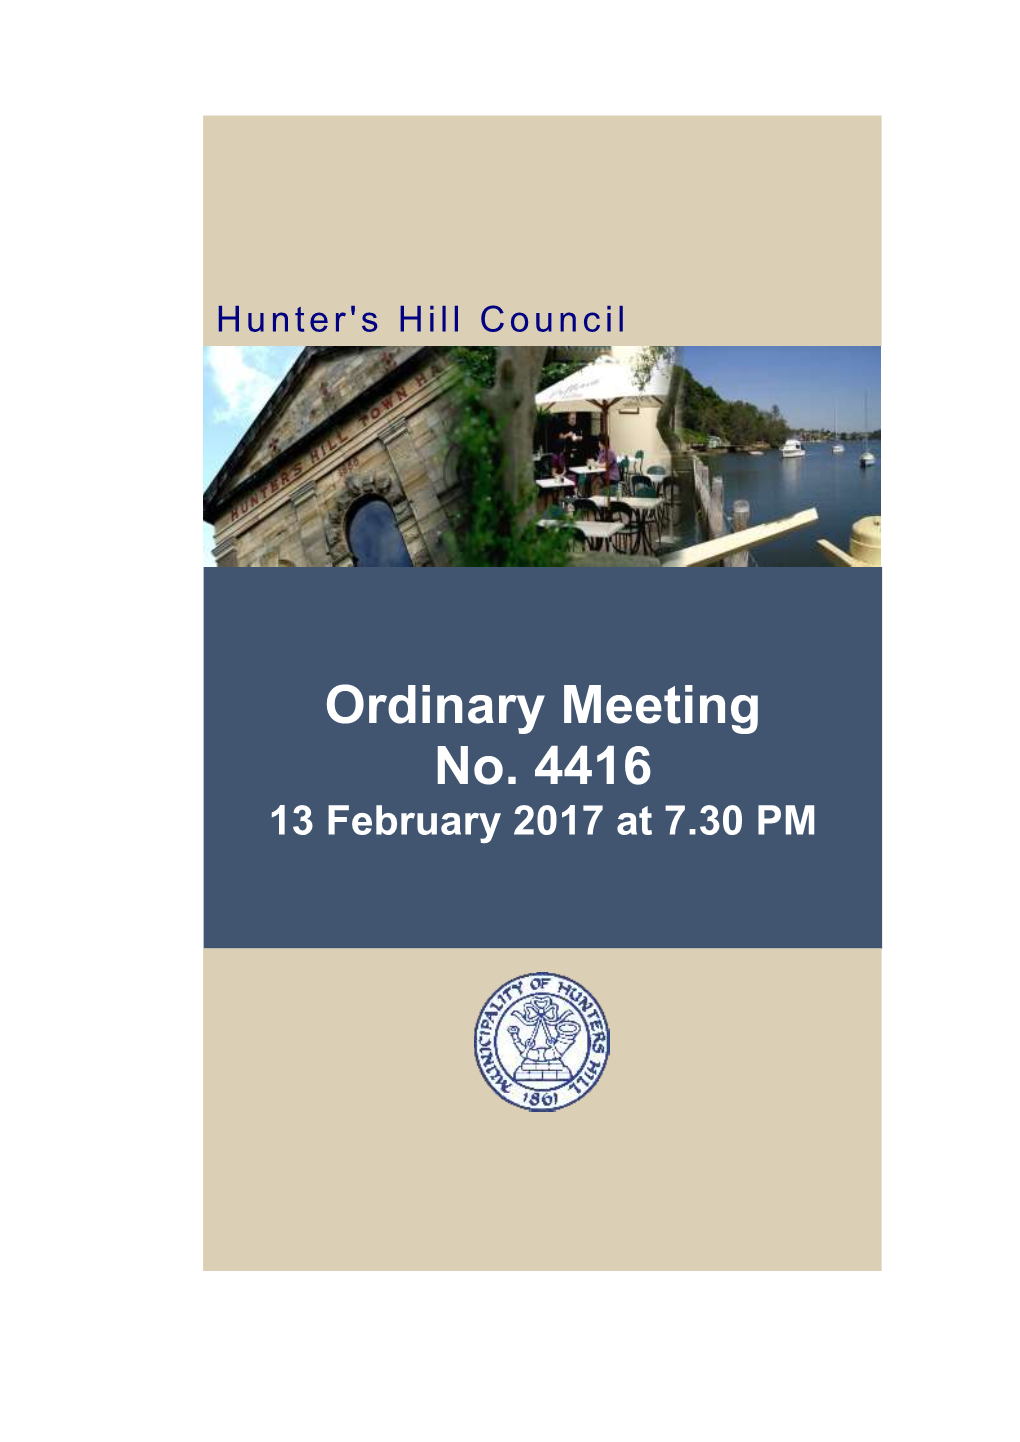 Ordinary Meeting No. 4416 to Be Held 13 February 2017 and Asks That Her Apologies Be Recorded for This Meeting